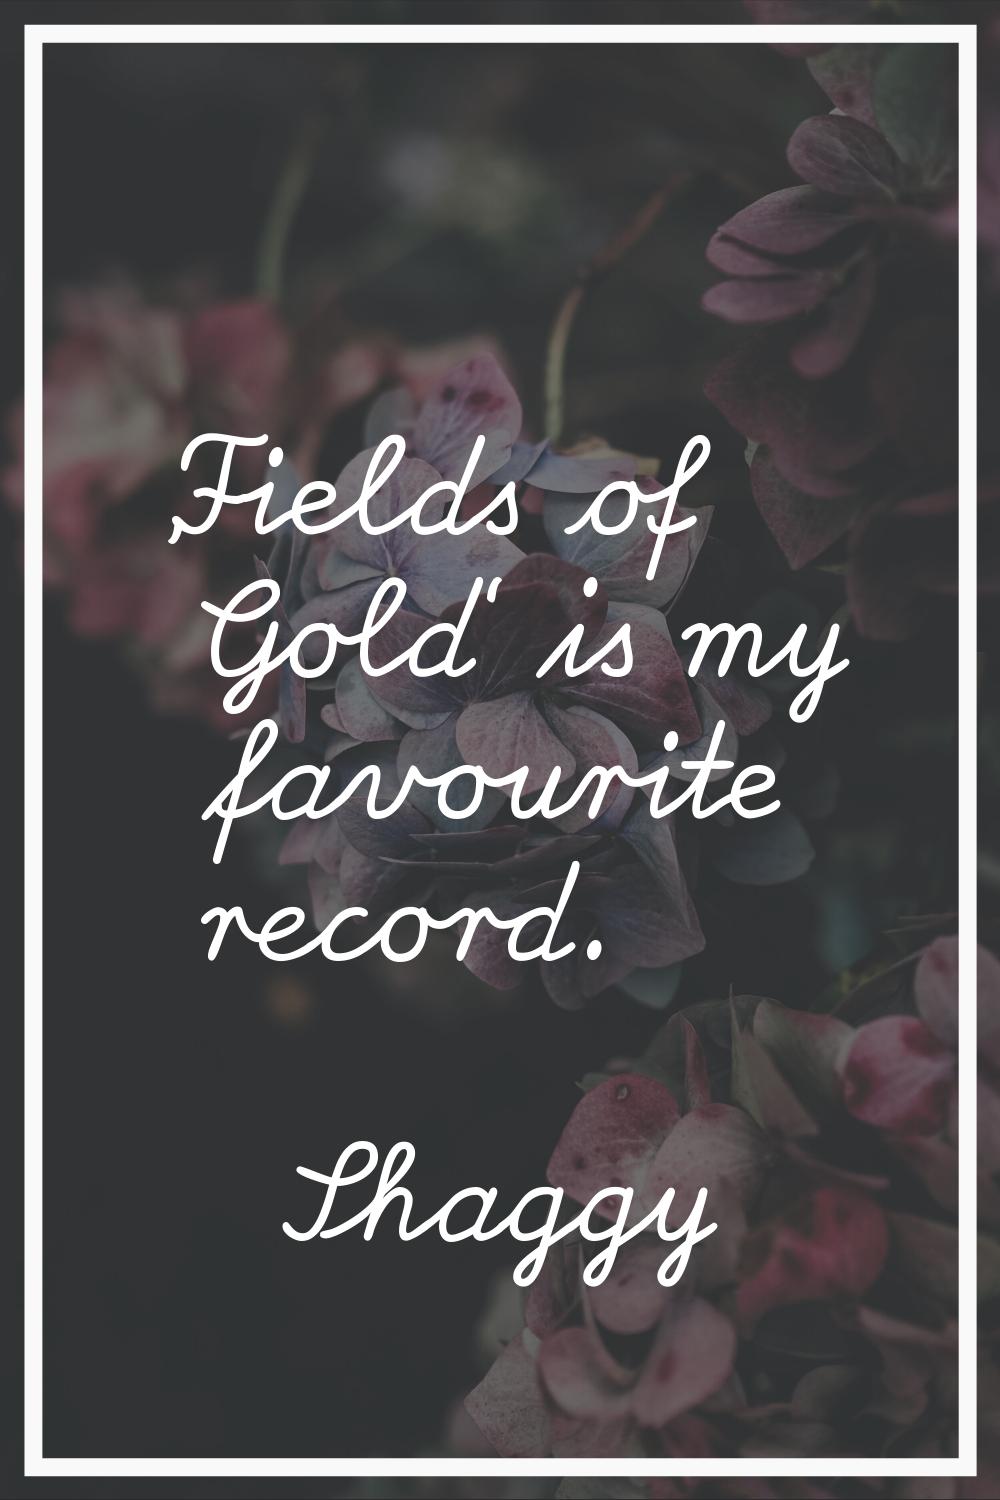 'Fields of Gold' is my favourite record.